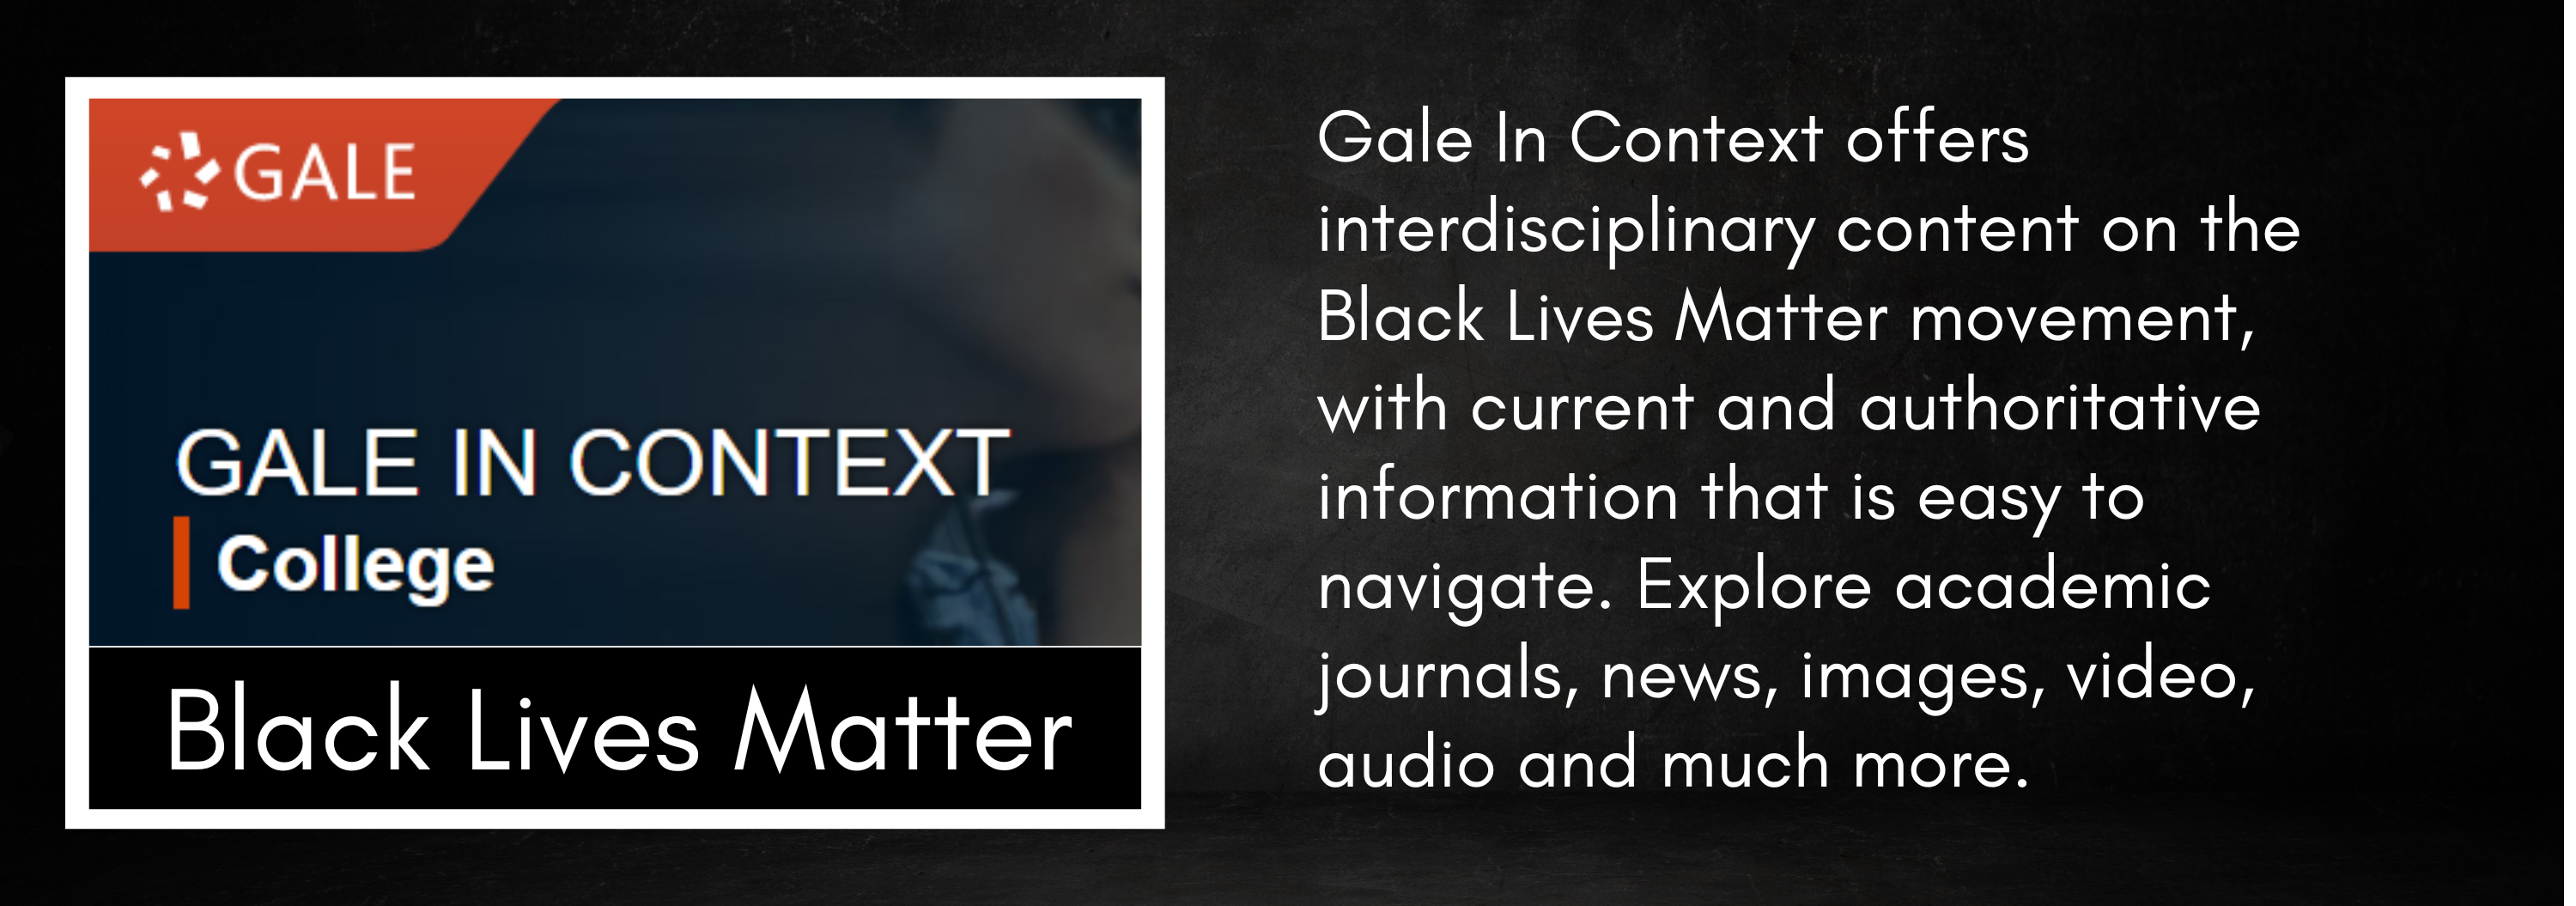 Gale In Context, featured content on the Black Lives Matter movement